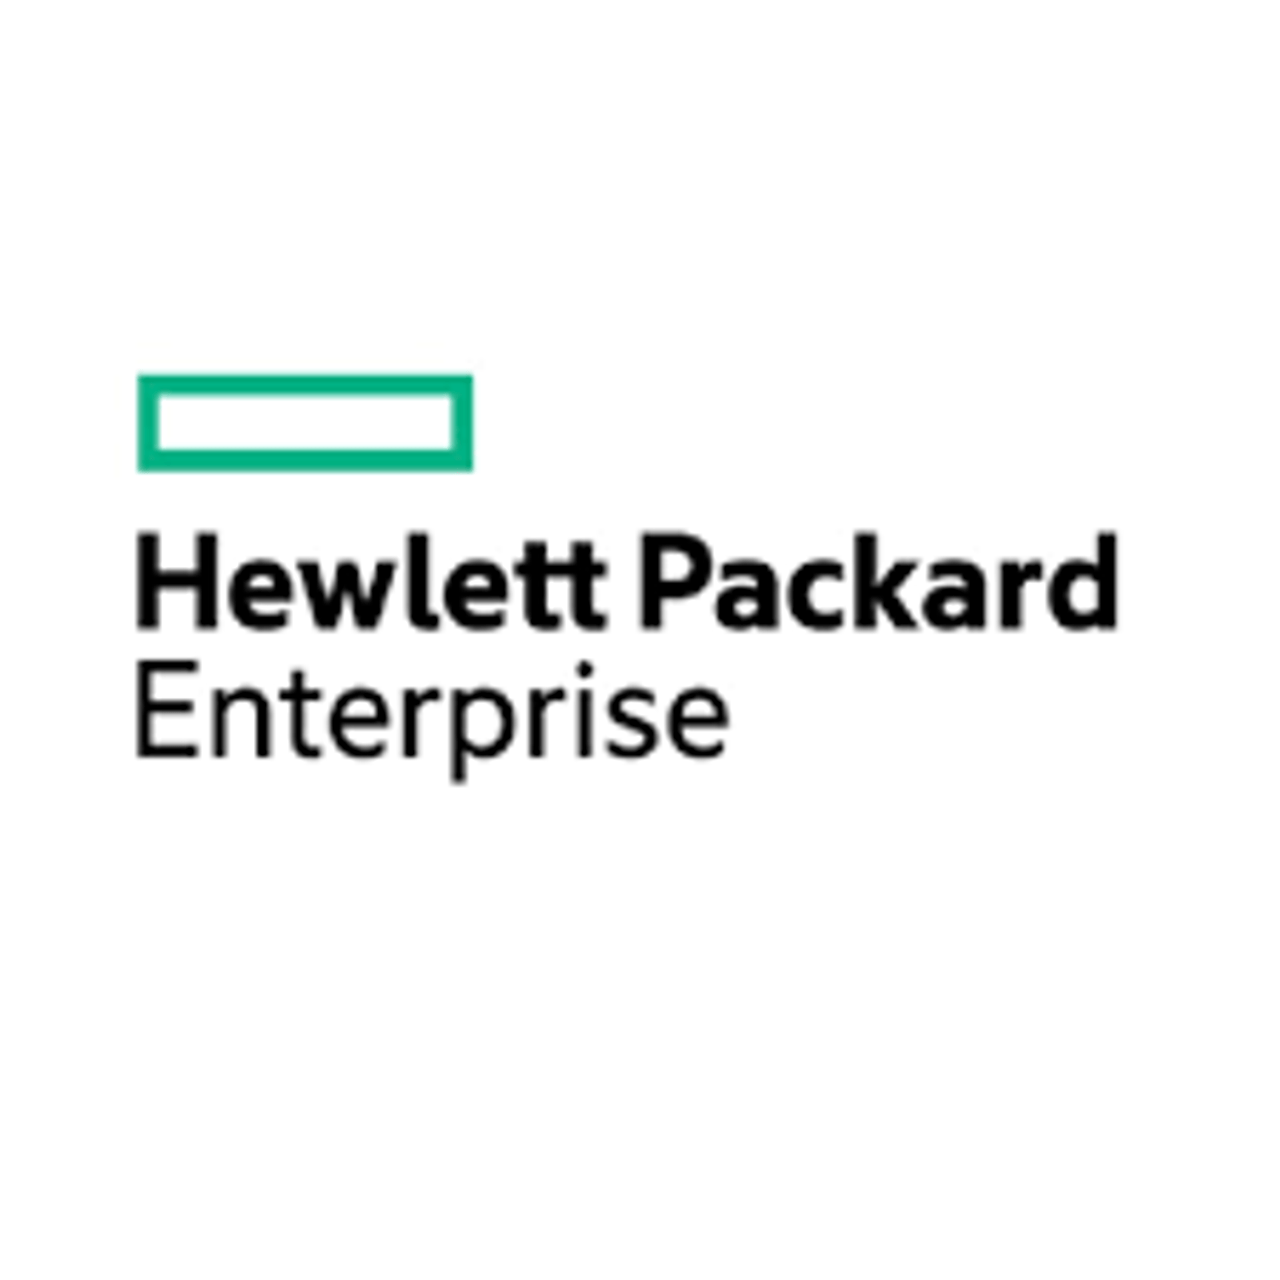 HPE Apollo 4200 Gen10 8260 Kit Factory integrated